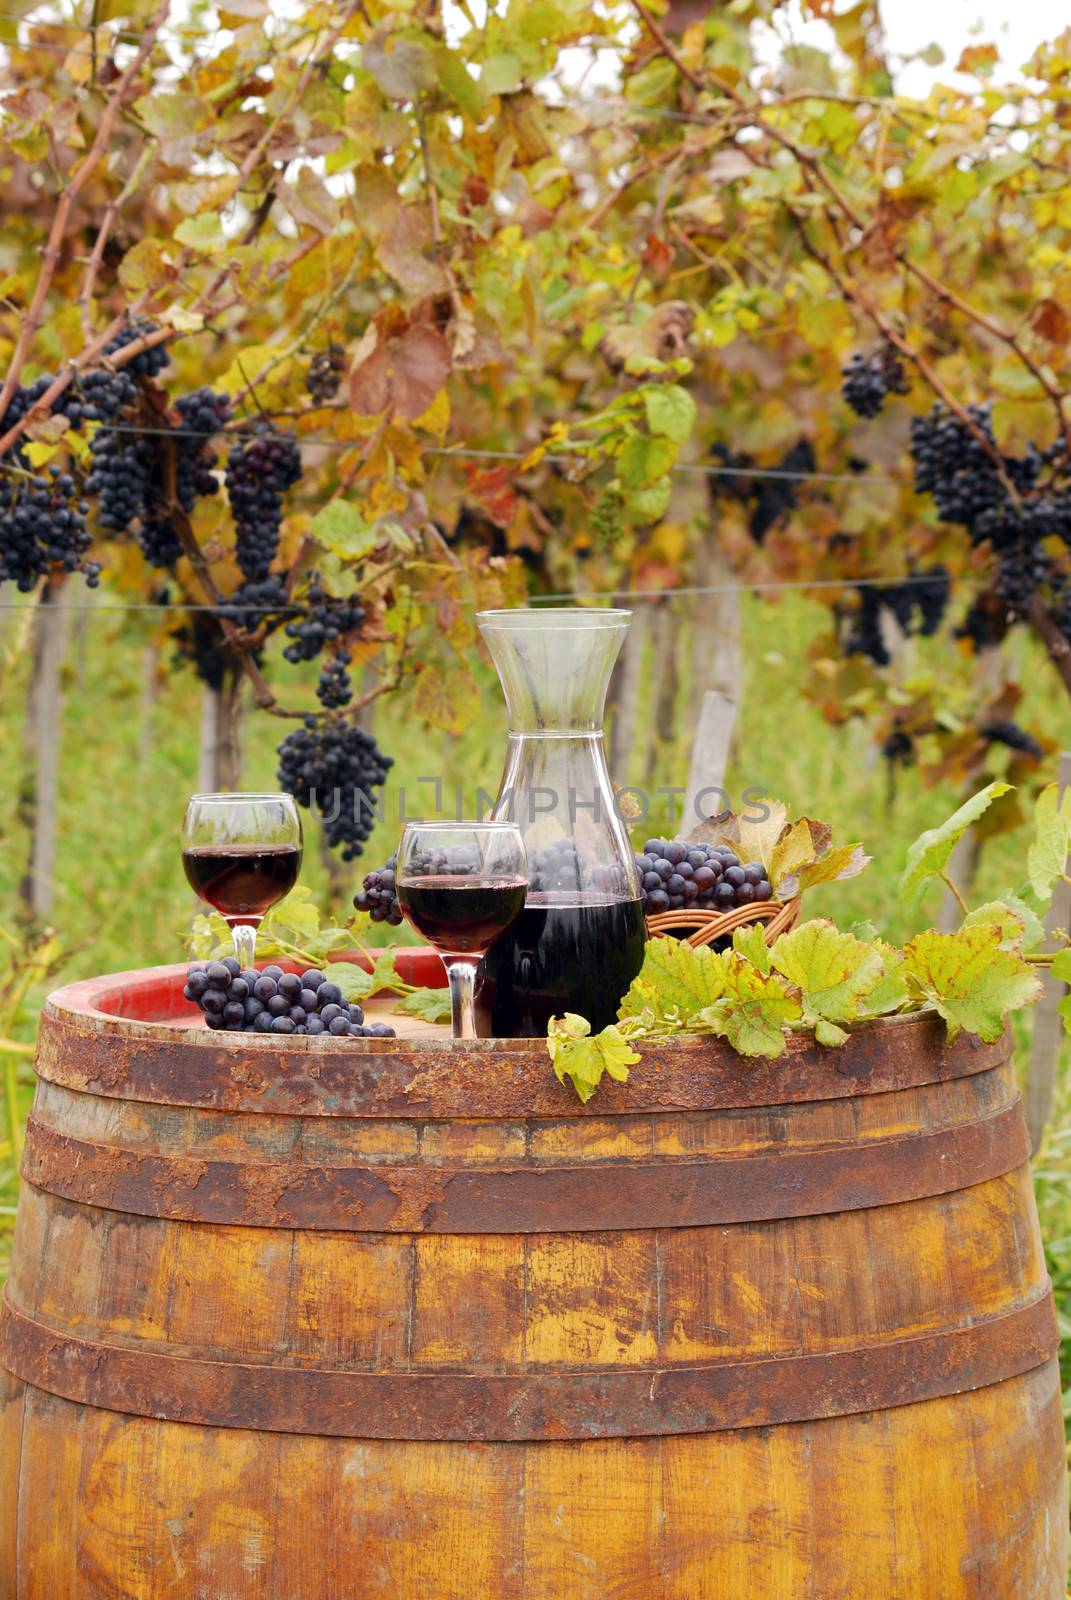 red wine on old wooden barrel